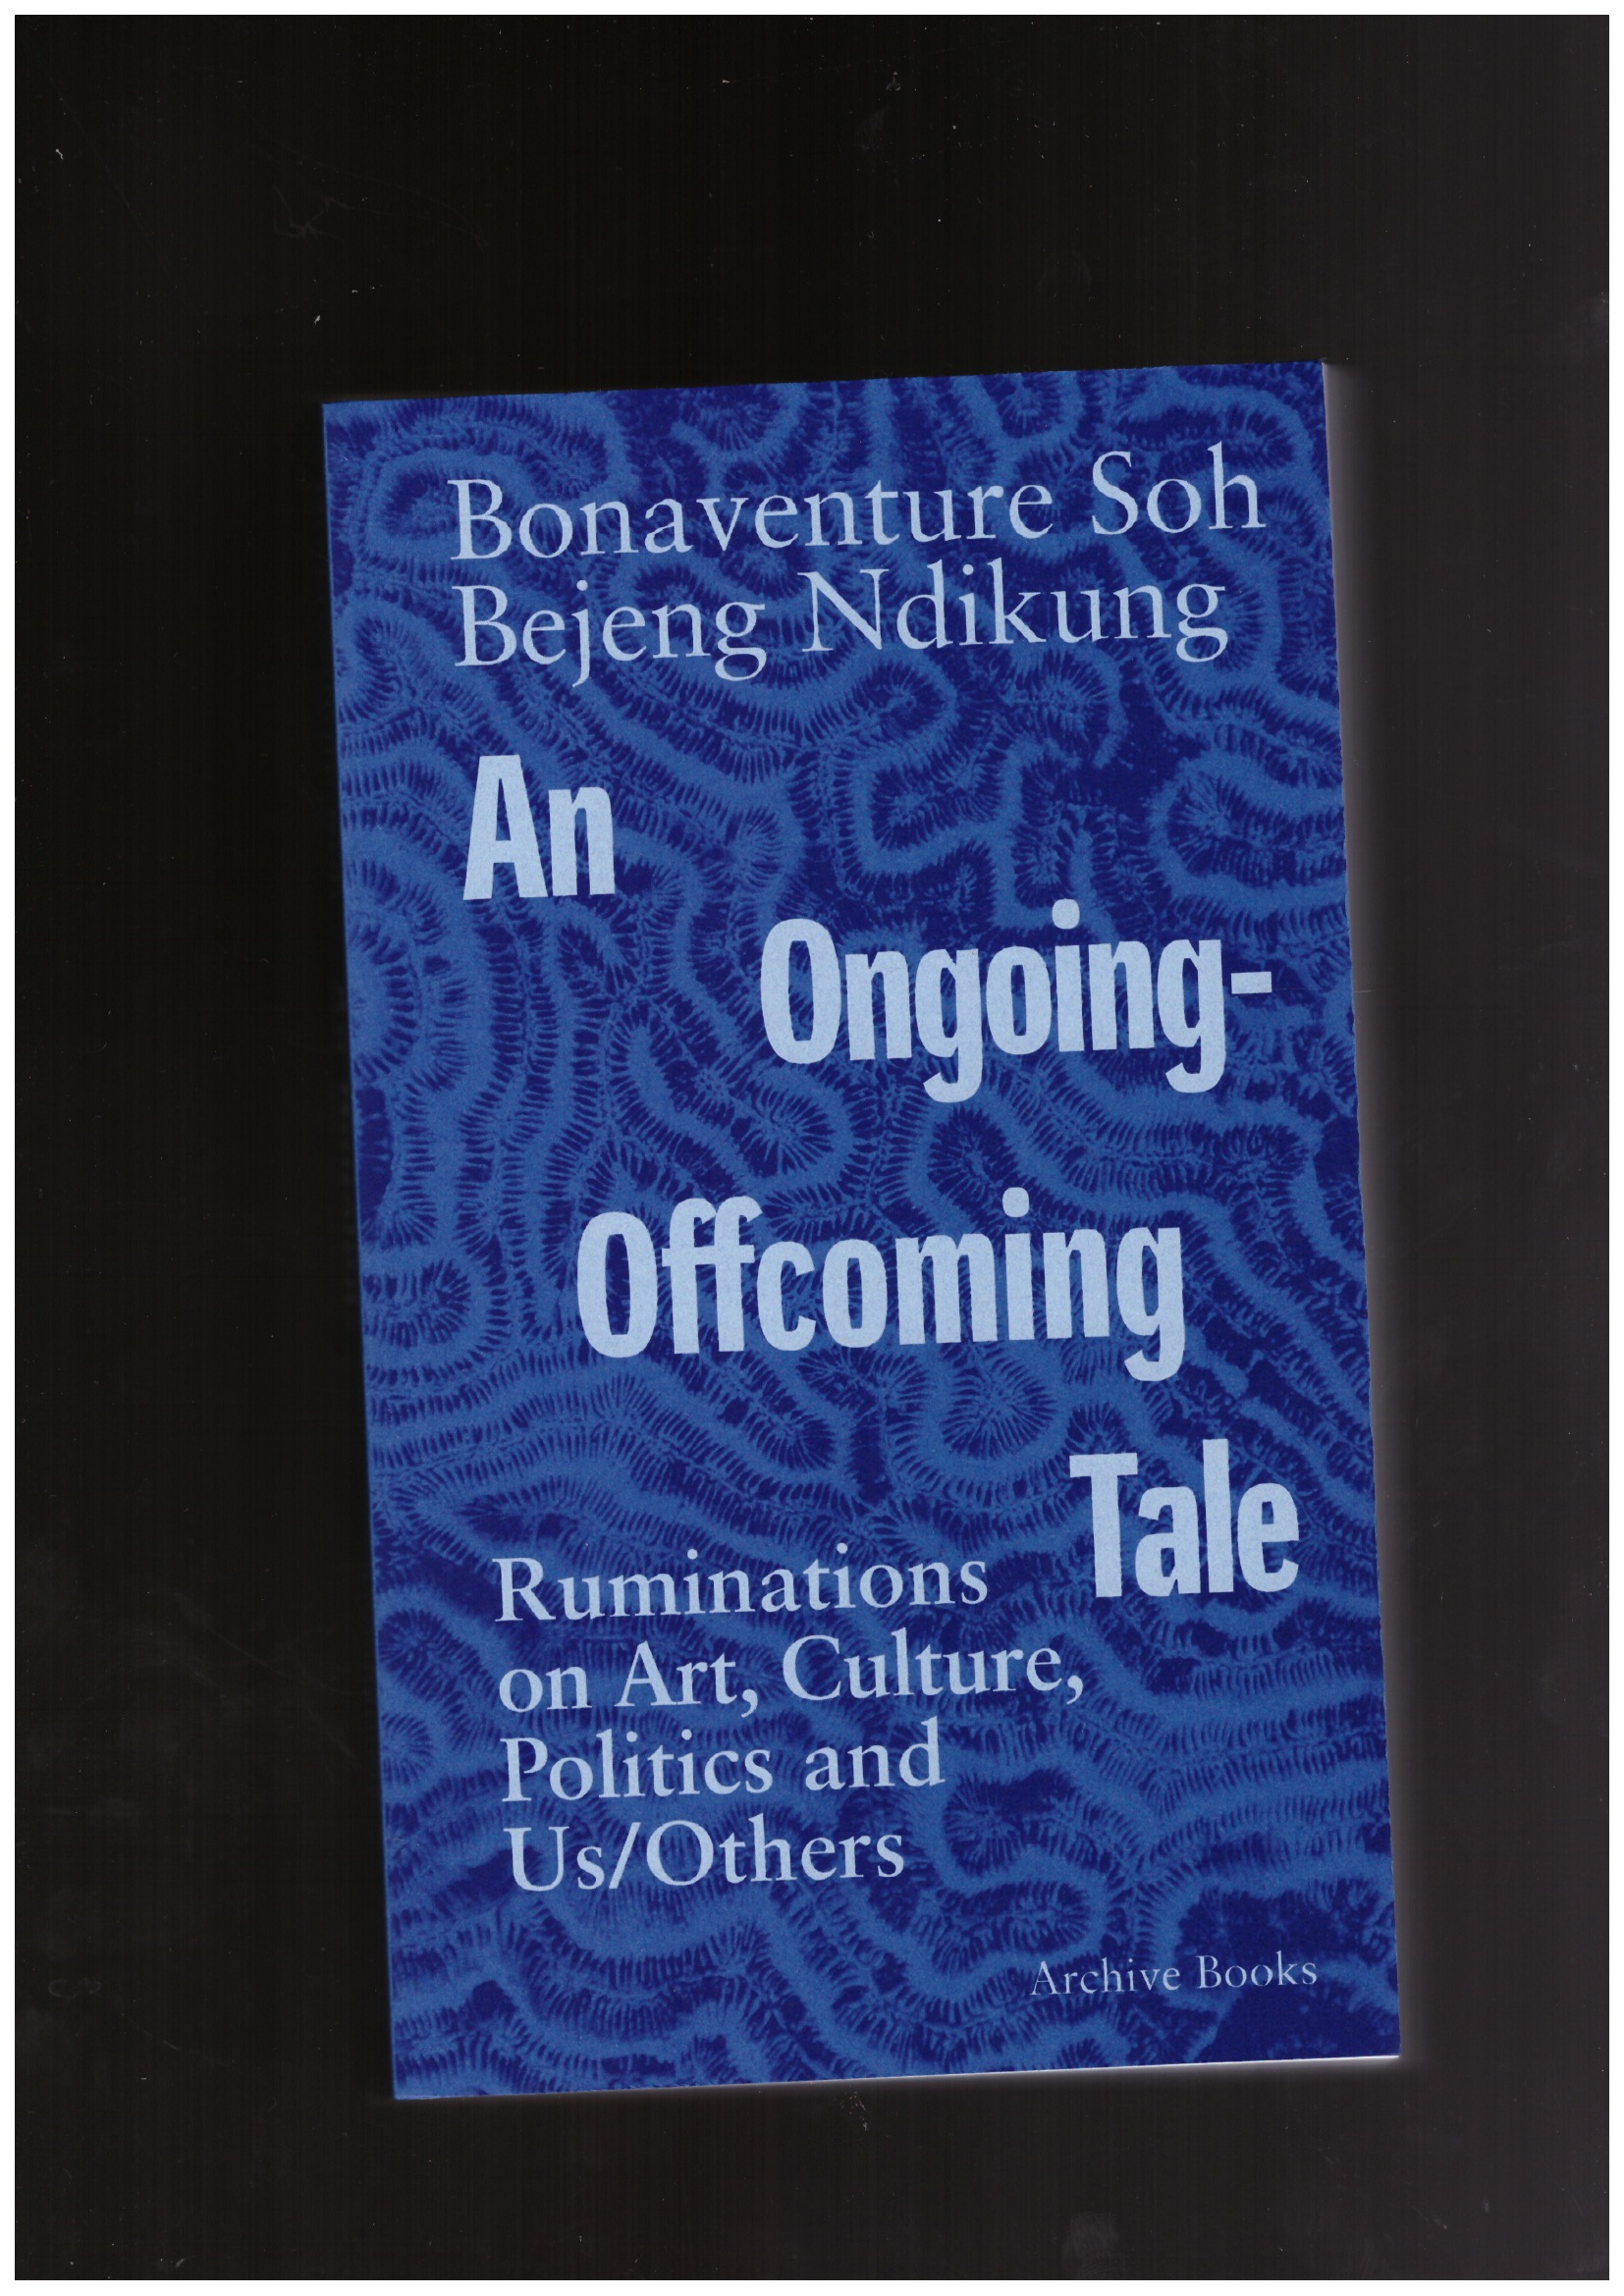 NDIKUNG, Bonaventure Soh Bejeng - An Ongoing-Offcoming Tale. Ruminations on Art, Culture, Politics and Us/Others